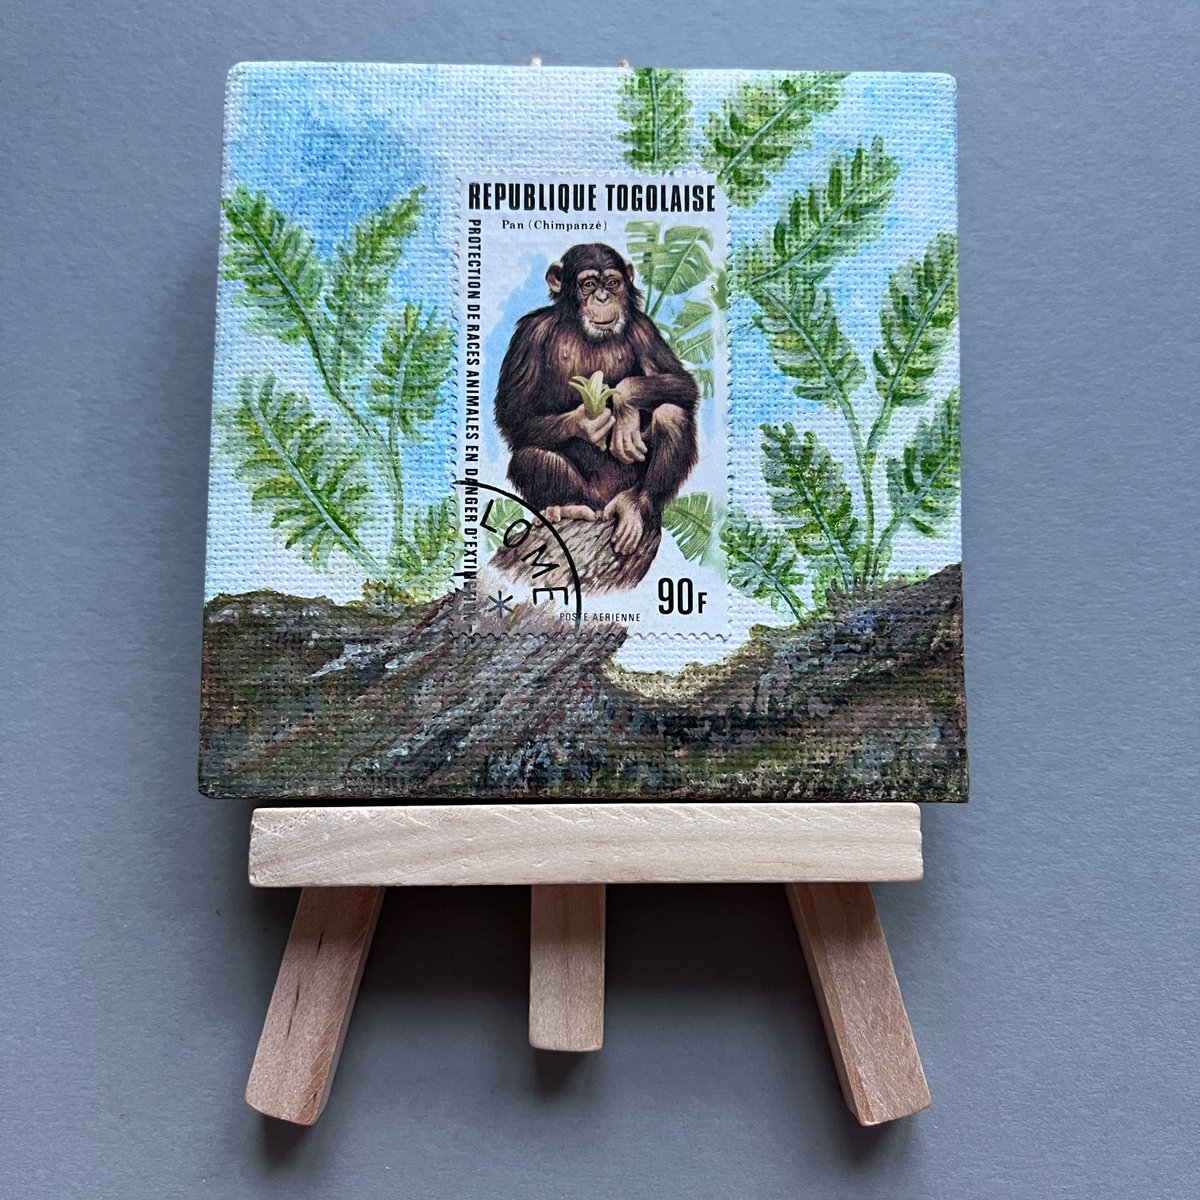 Chimpanzee Stamp made into art, on its own little easel!🐒 🐵 
 approx 4.5 inches high, a perfect size for displaying little stamp paintings! 

#minicanvas #minicanvasart #minicanvaspainting #minicanvases #minicanvasartworks #smallart #shelfart #artfordesk #smallartwork